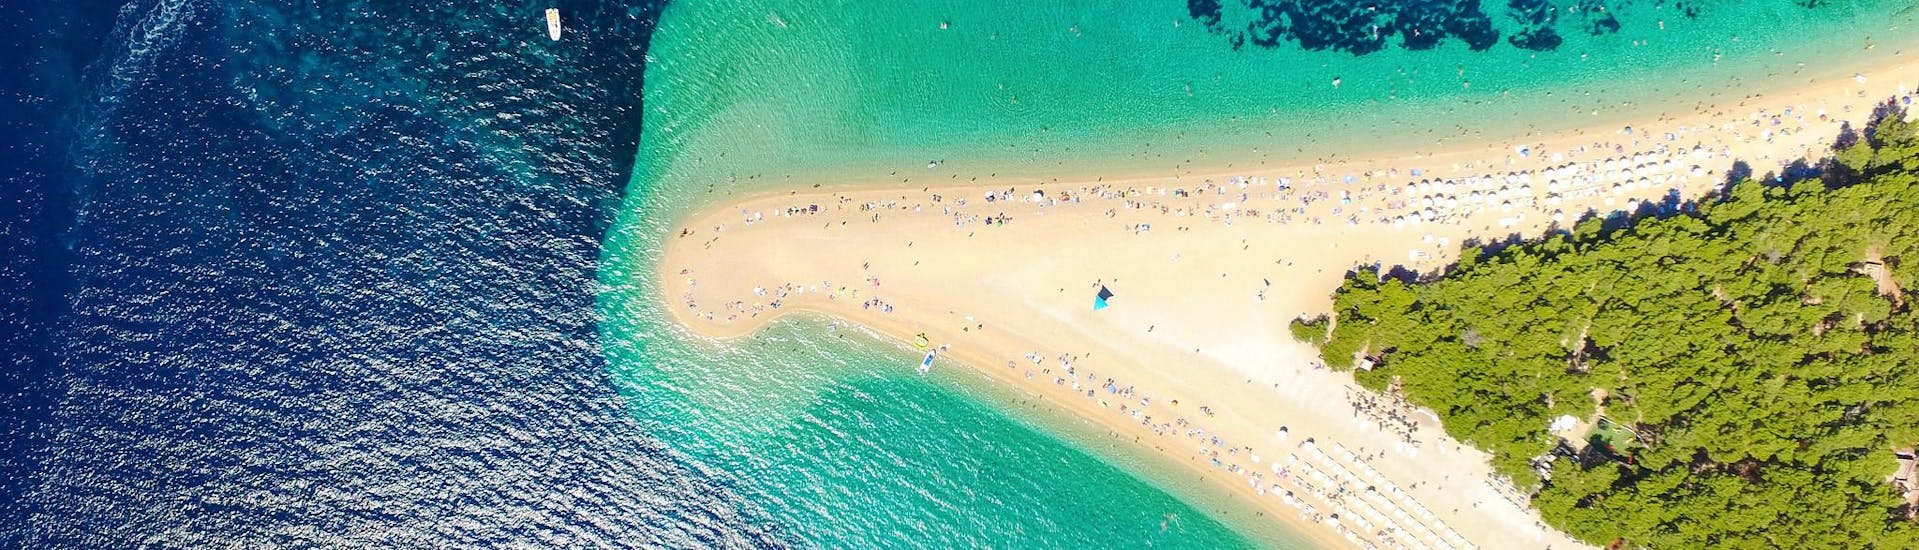 Aerial view of the beach of Zlatni Rat, also called Golden Horn, one of the most popular sites to discover on a boat trip to Brač Island.